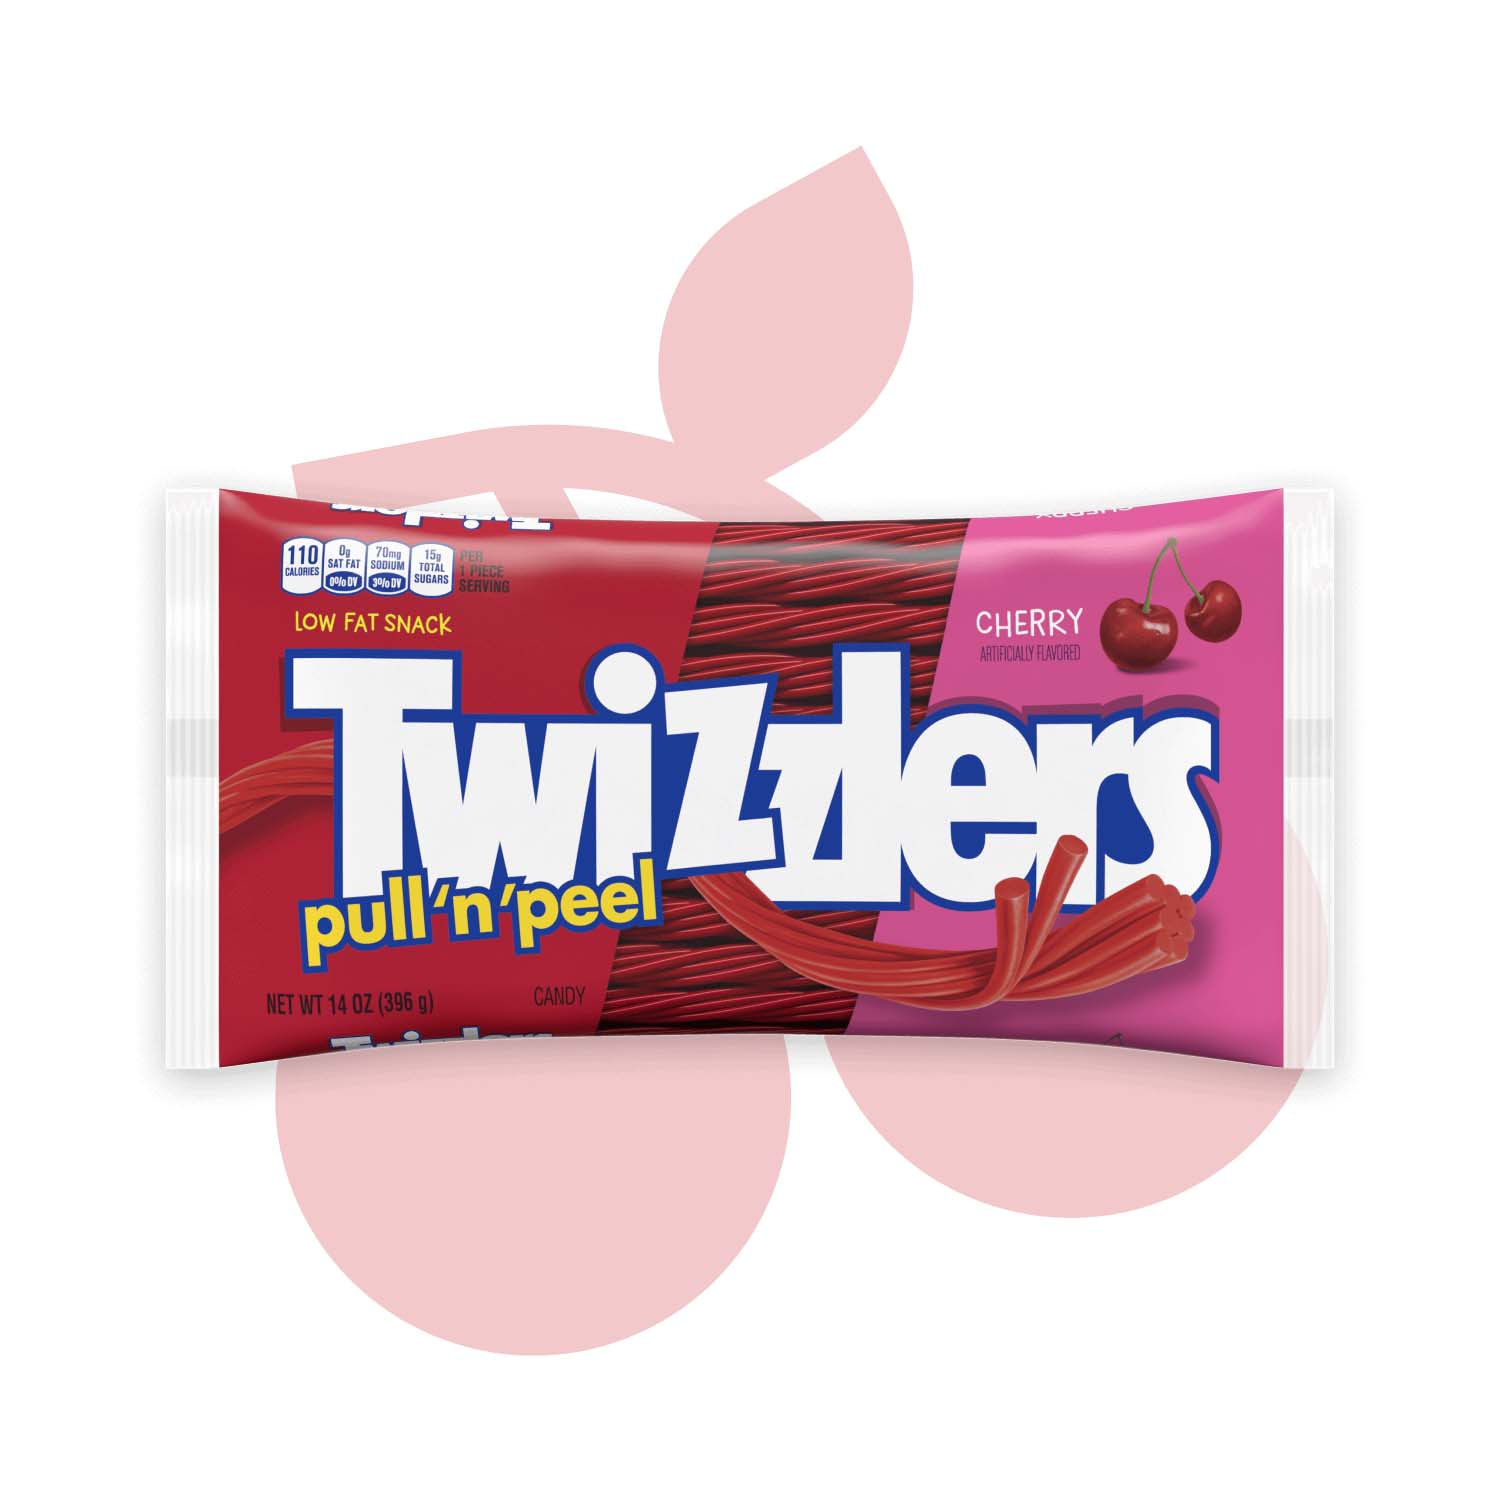 bag of twizzlers pull n peel cherry flavored candy